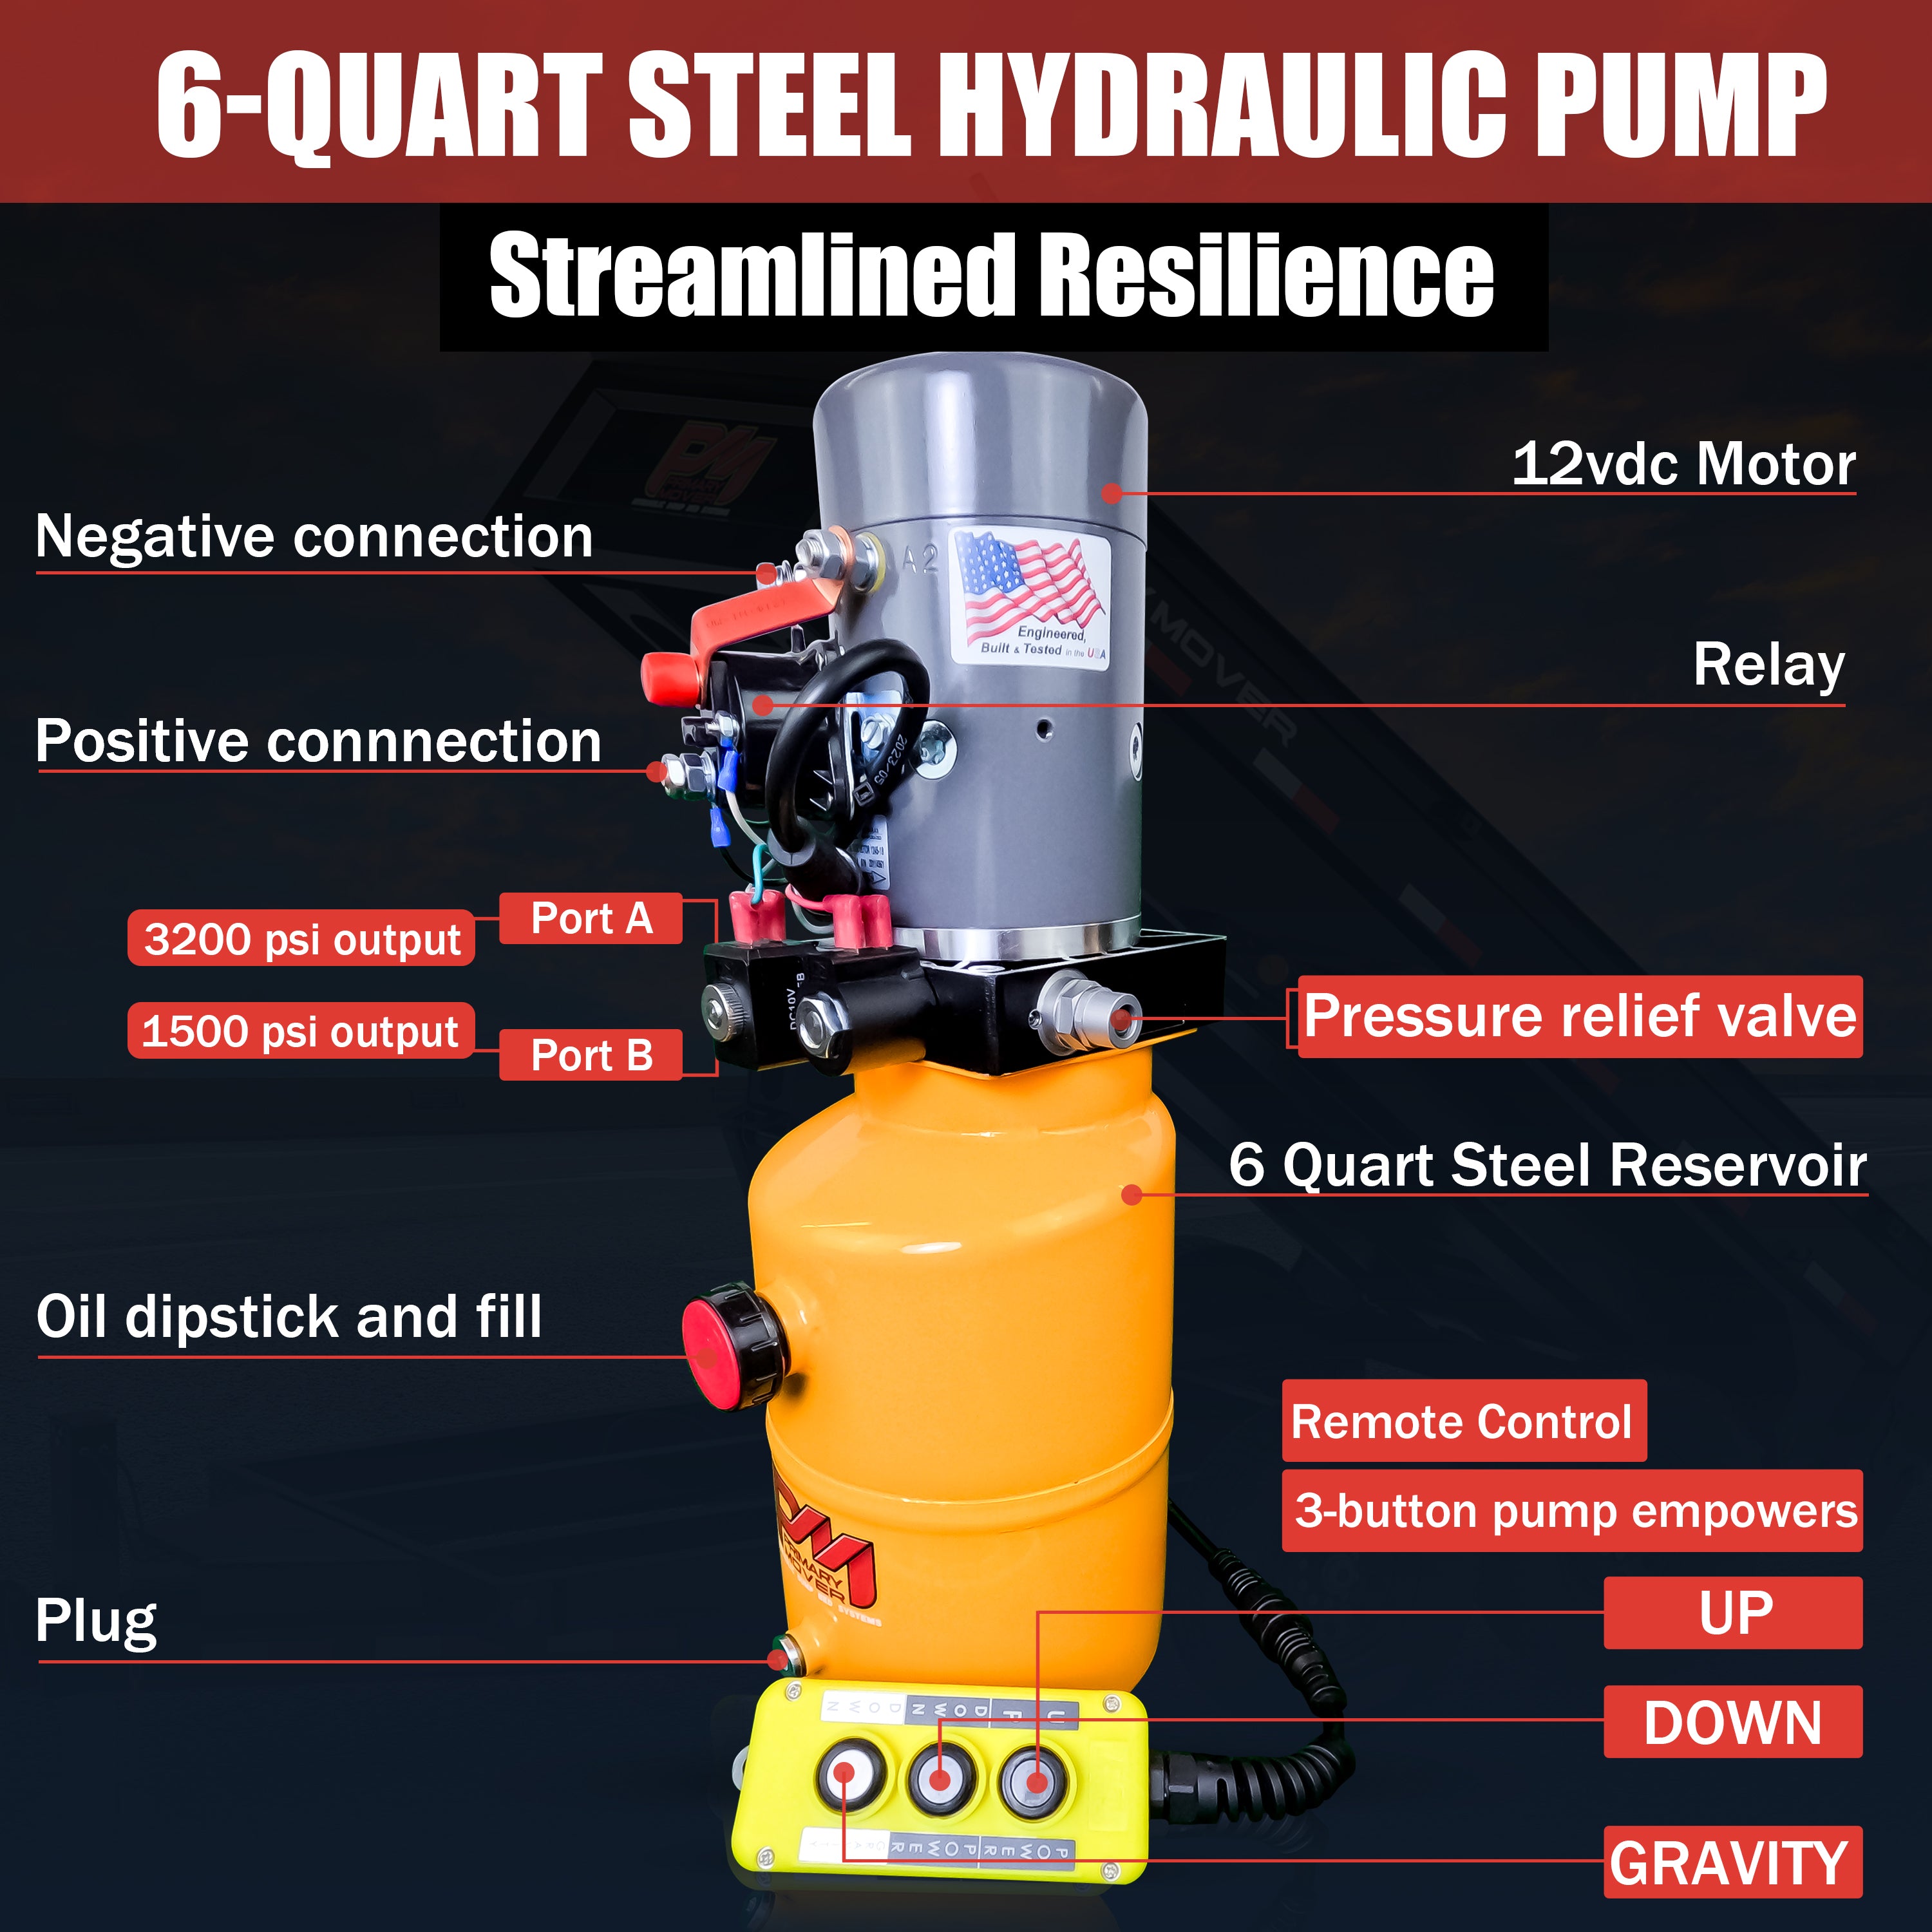 KTI 12V Double-Acting Hydraulic Pump with a steel reservoir, featuring red buttons and control panel, designed for efficient performance in hydraulic dump bed systems.